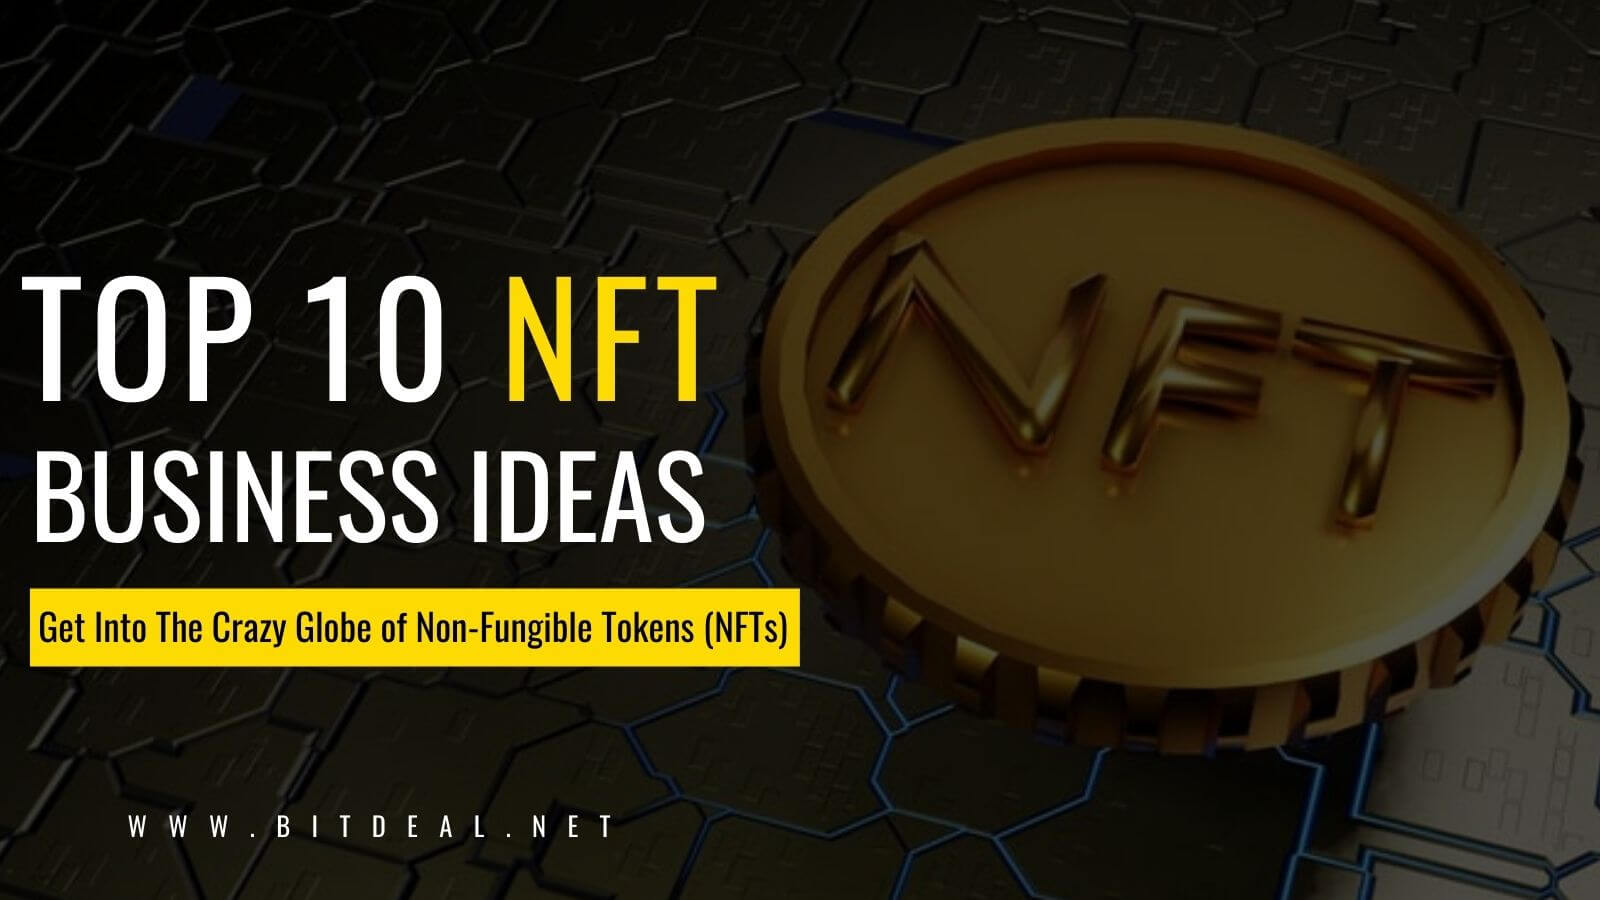 Top 10 Easy To Start NFT Business Ideas For 2021